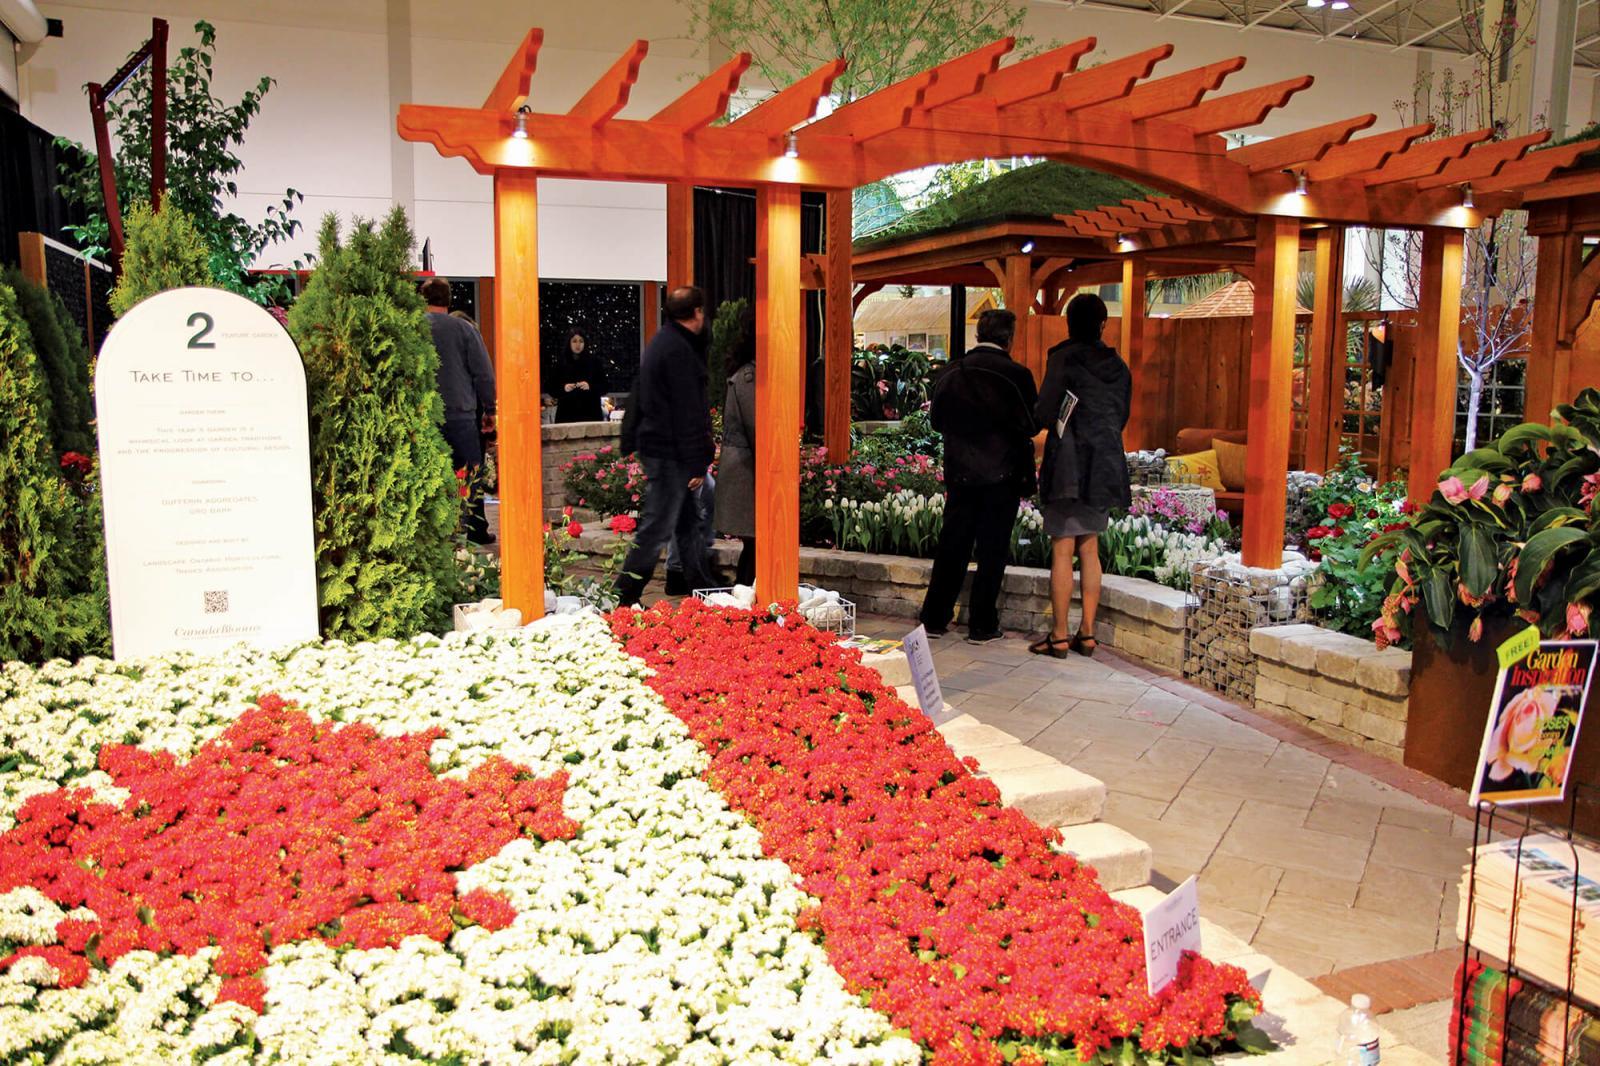 Display gardens at Canada Blooms will reflect  sesquicentennial celebrations for Canada.